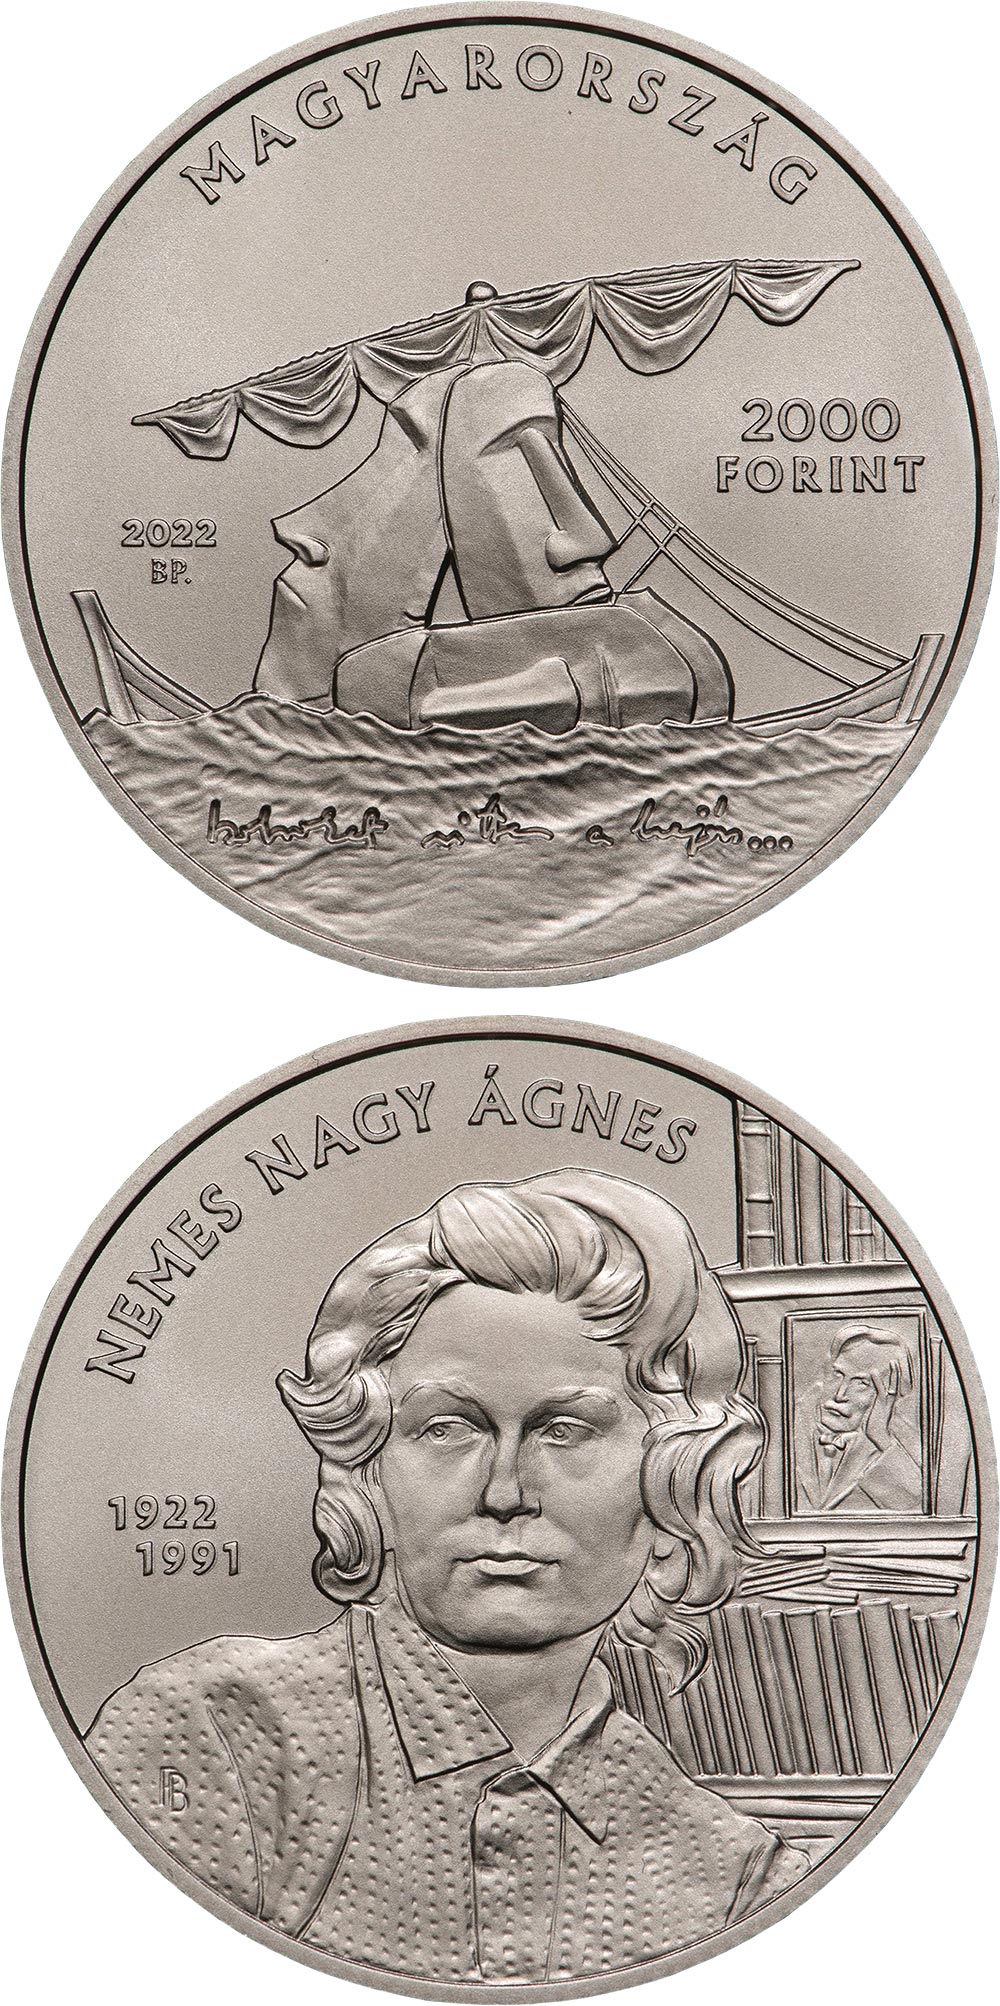 Image of 2000 forint coin - 100th anniversary of the birth of Ágnes Nemes Nagy | Hungary 2022.  The Copper–Nickel (CuNi) coin is of BU quality.